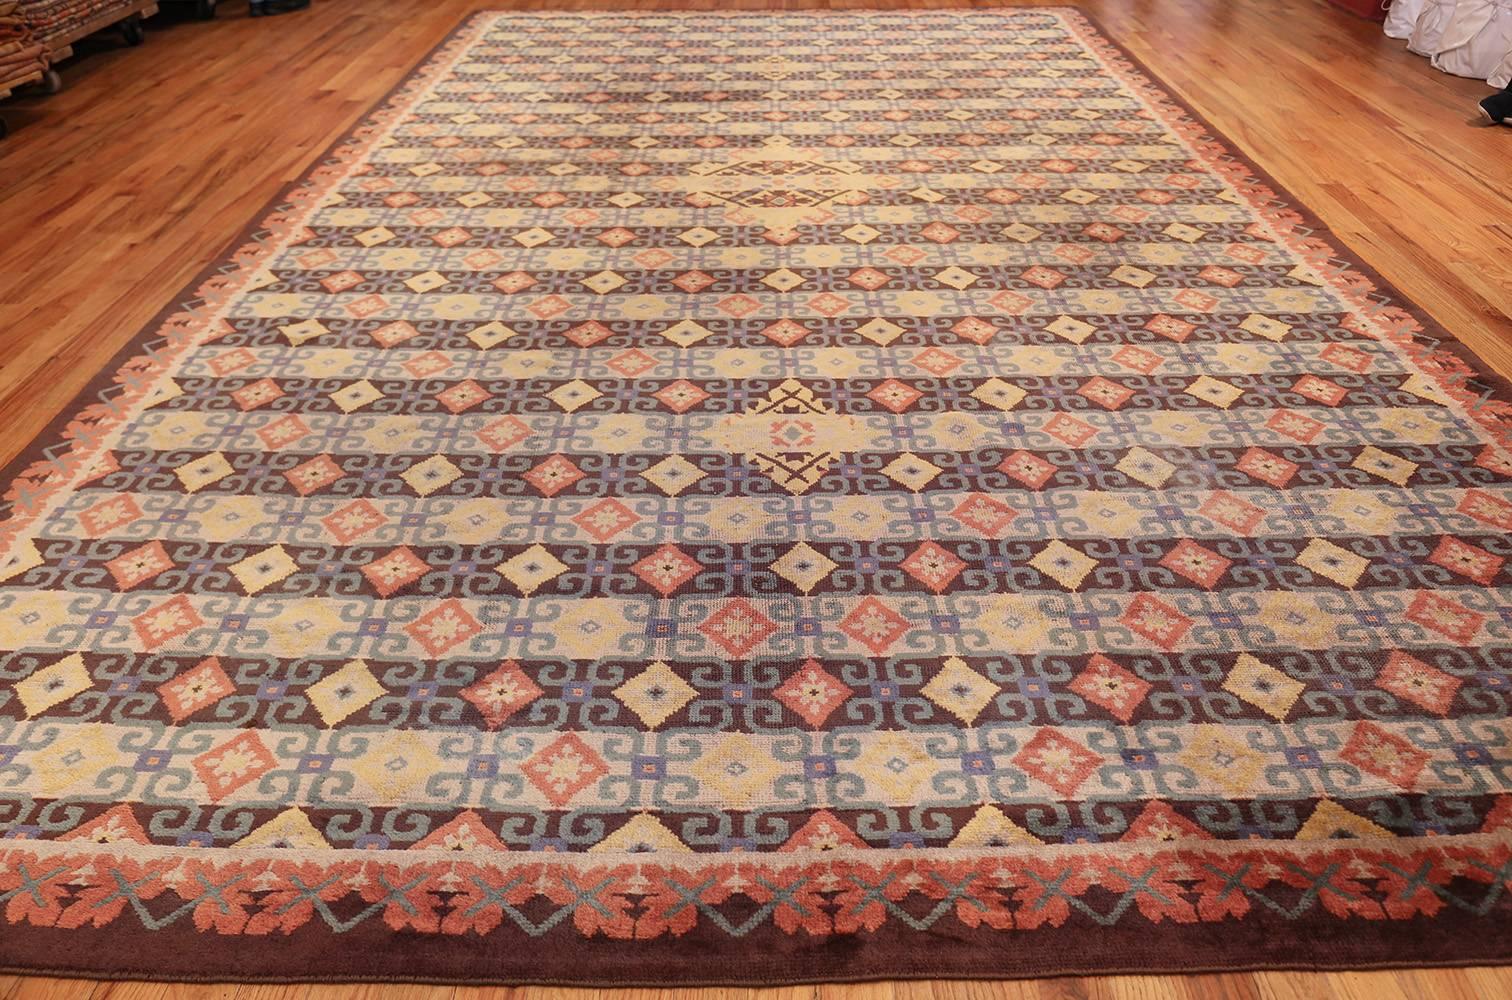 Magnificent large vintage Mid-Century English Axminster rug, country of origin / rug type: England rug, date circa mid–20th century. This vintage English Axminster rug was created in the middle of the twentieth century and features a magnificent and